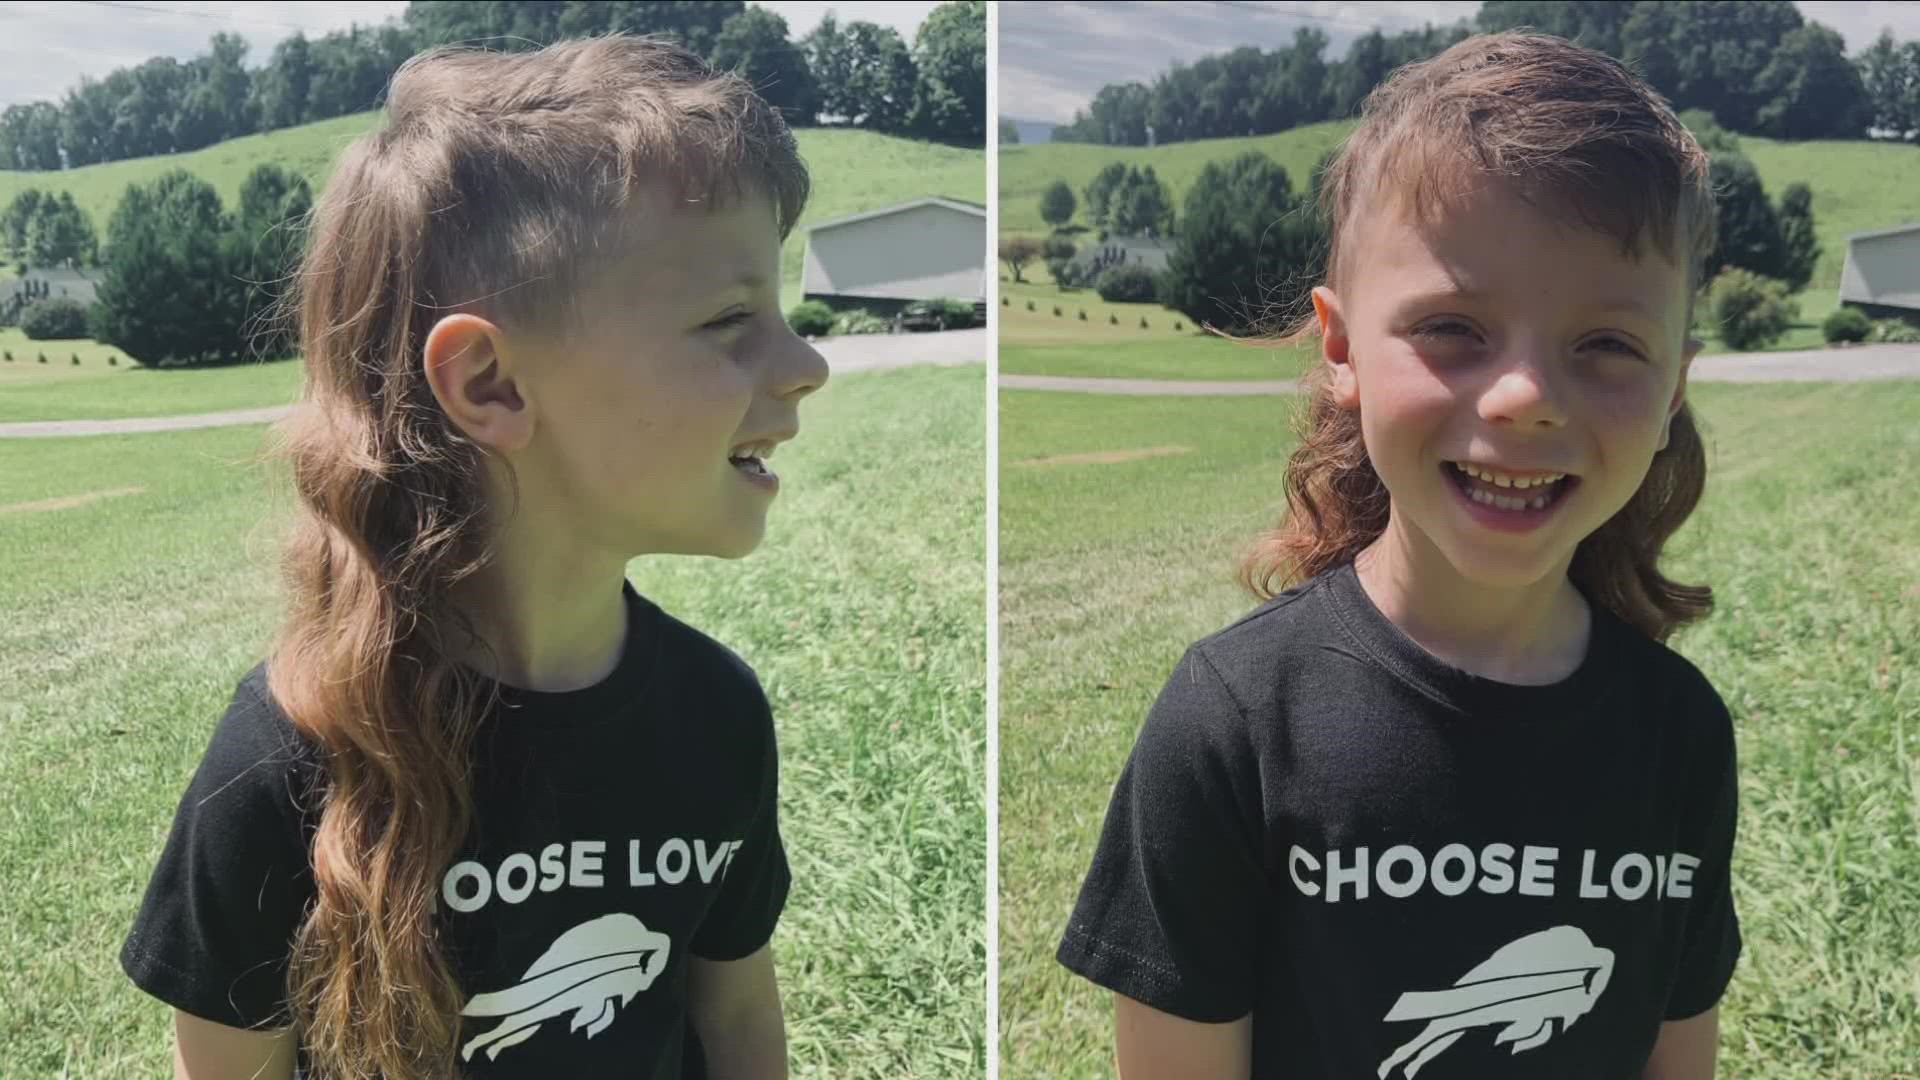 A national mullet championship for kids is down to the top 25 contestants. And among those needing votes by midnight, is a 6-year-old from Buffalo.